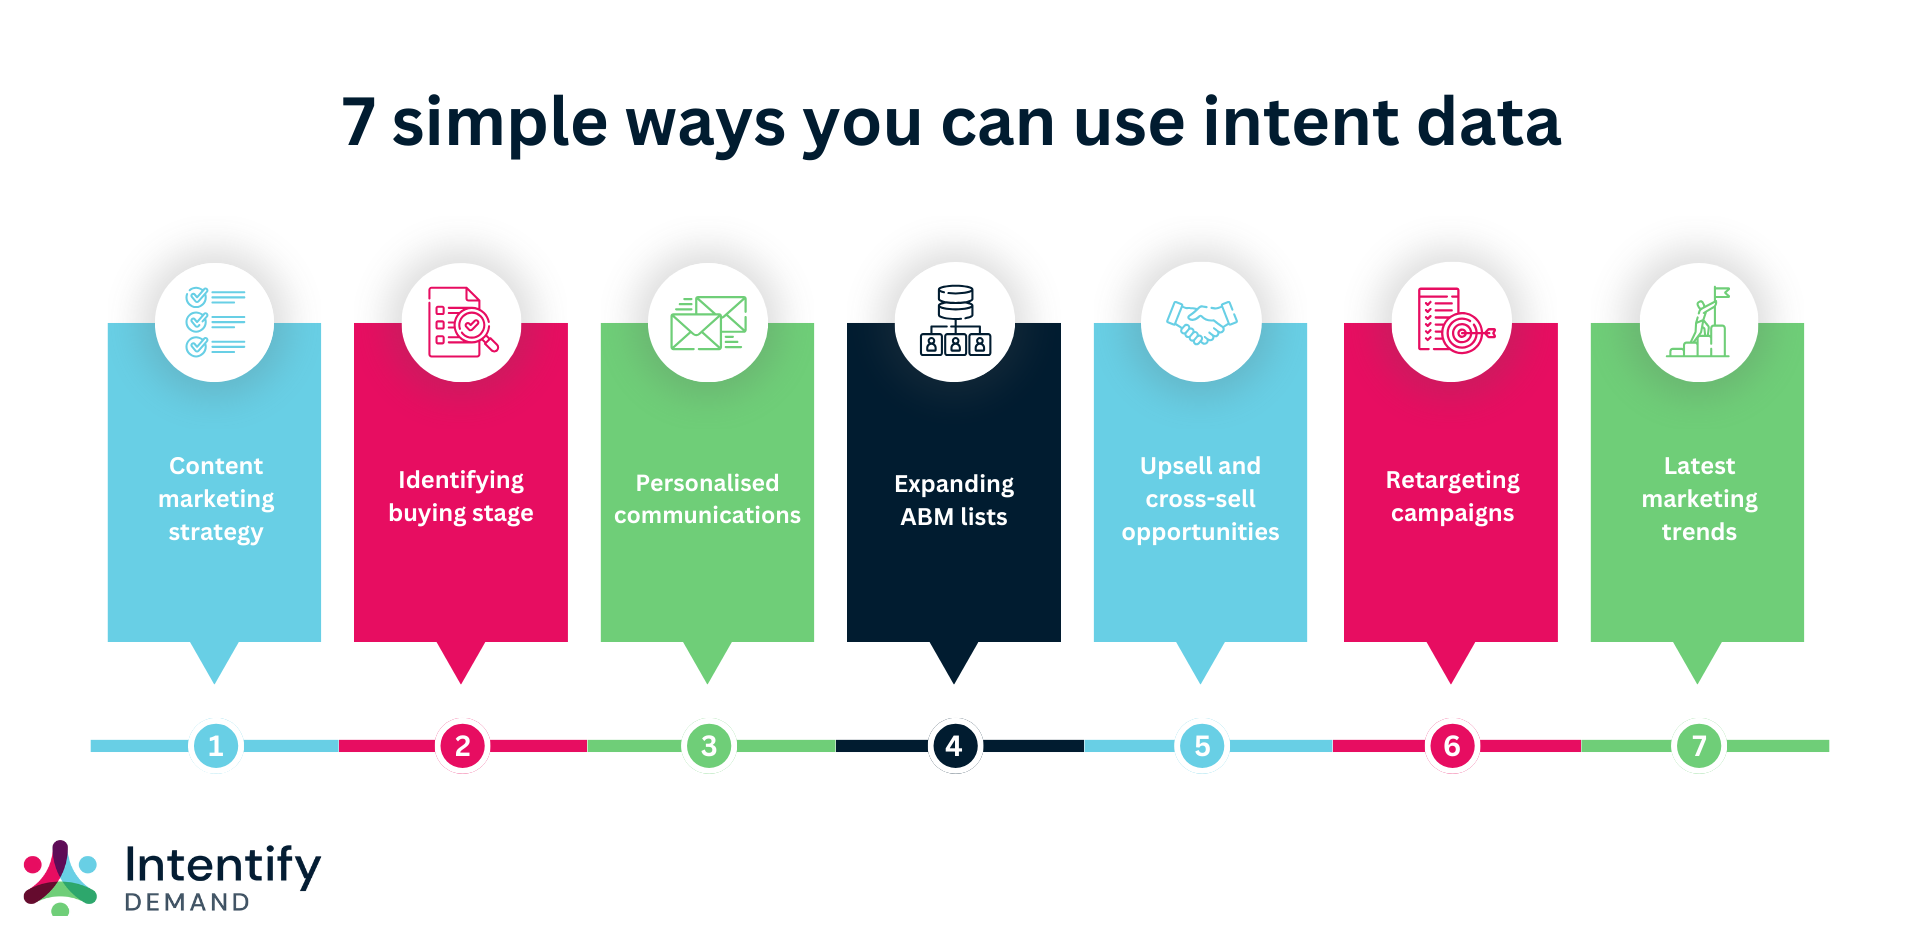 7 simple ways you can use intent data